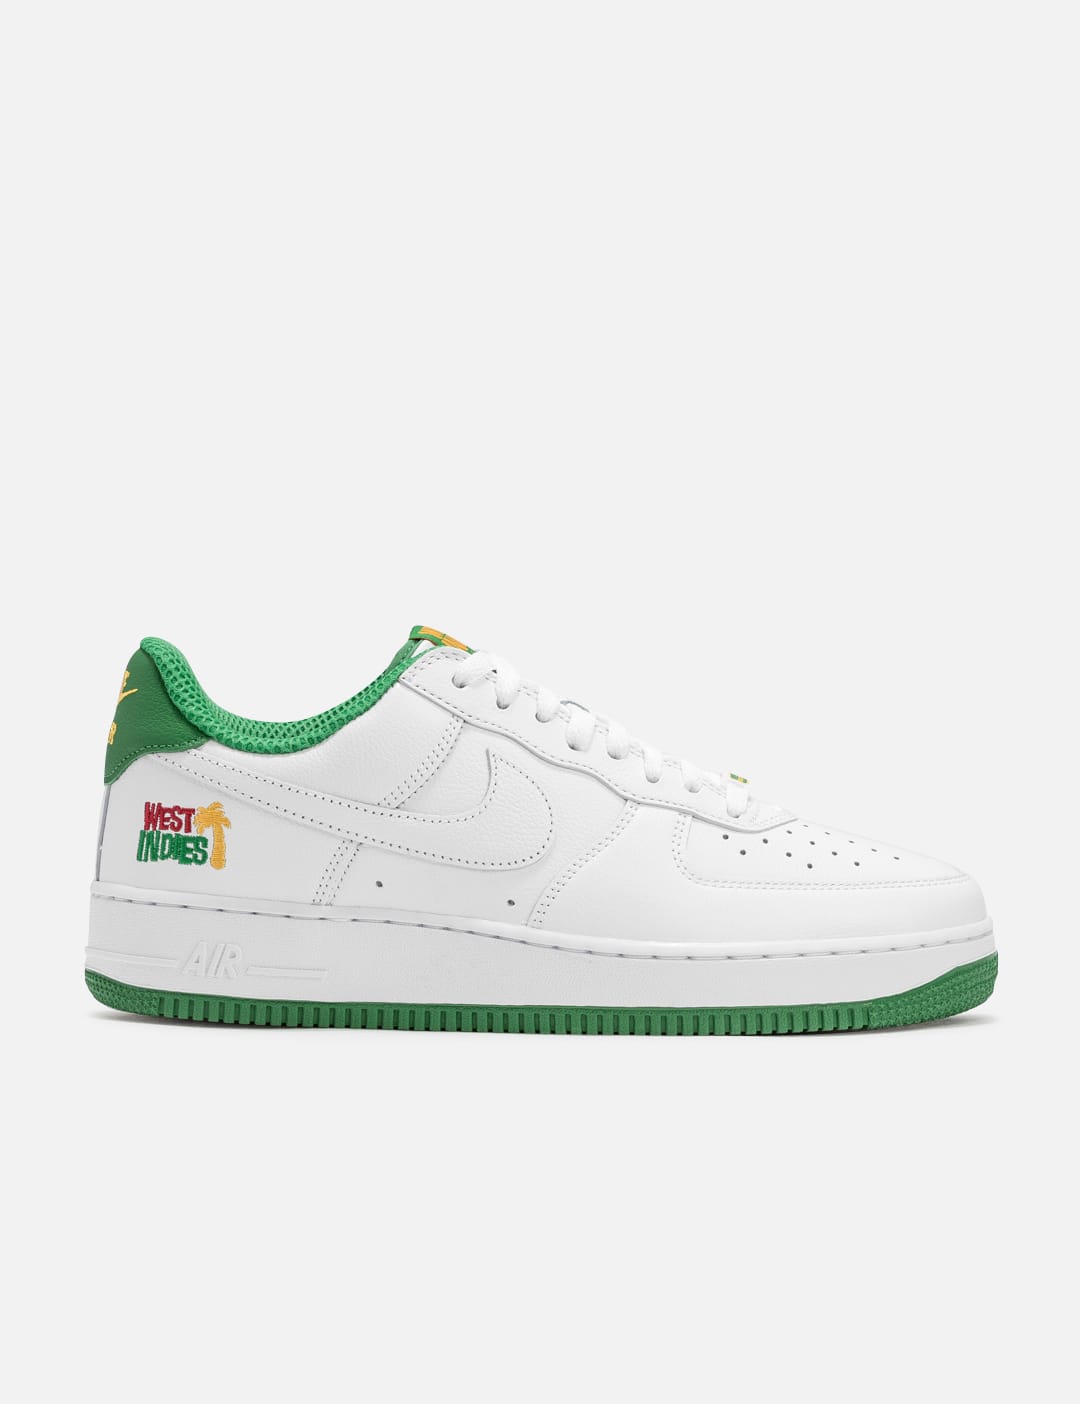 Nike - Air Force 1 Low West Indies | HBX - Globally Curated Fashion